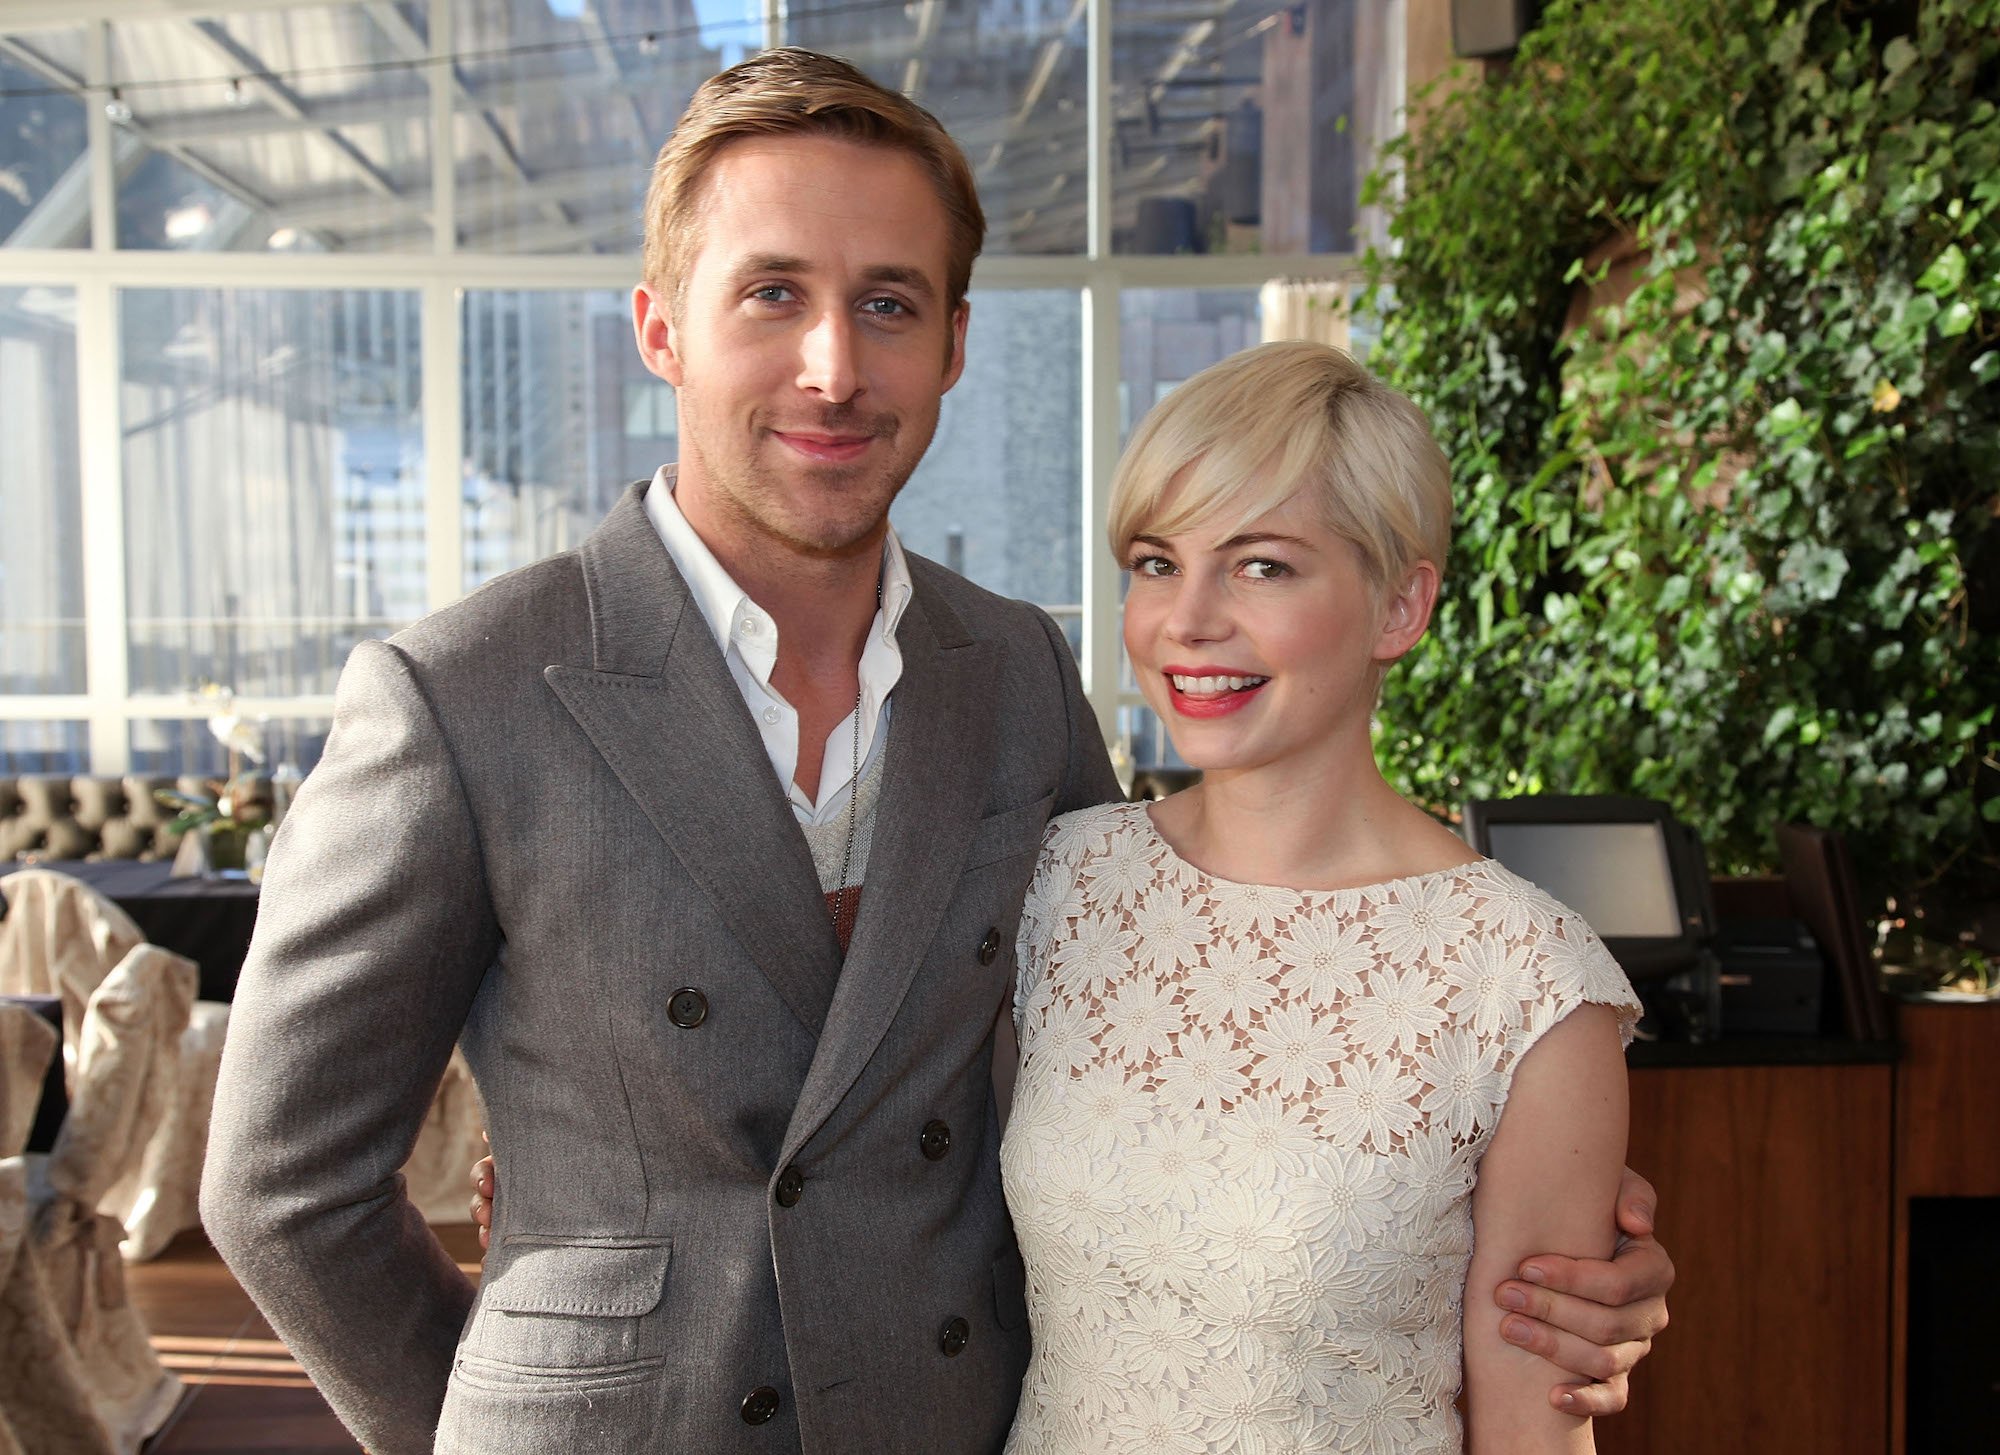 Dated who has ryan gosling Who Has